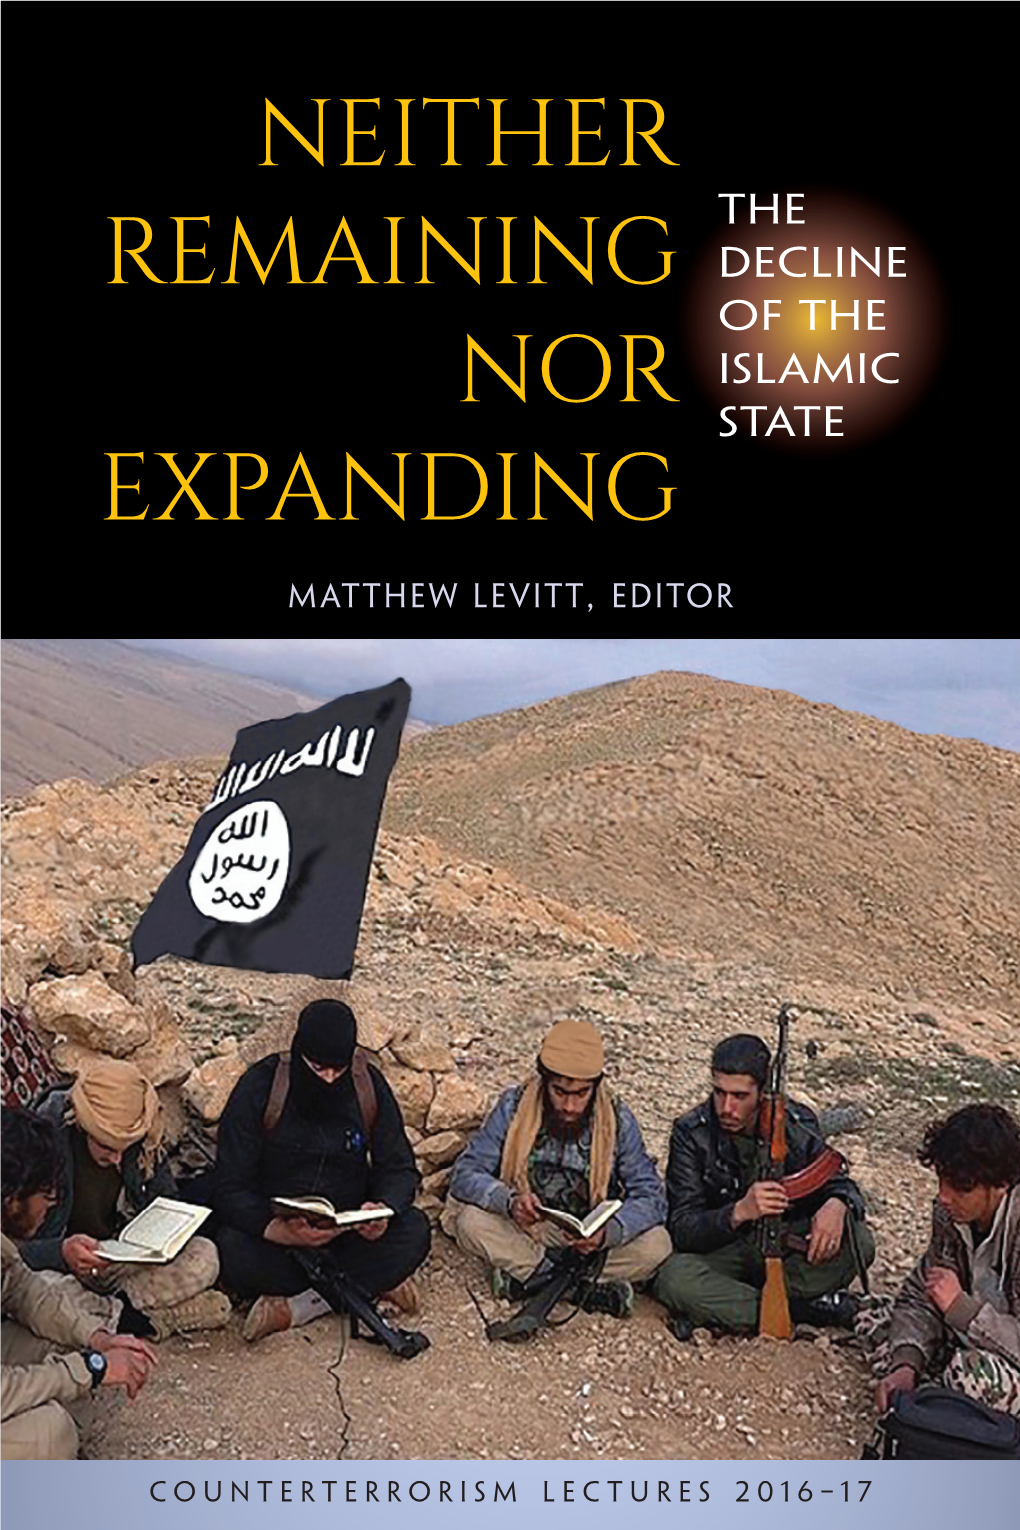 Neither Remaining Nor Expanding: the Decline of the Islamic State, July 2018, PF 155, Vol